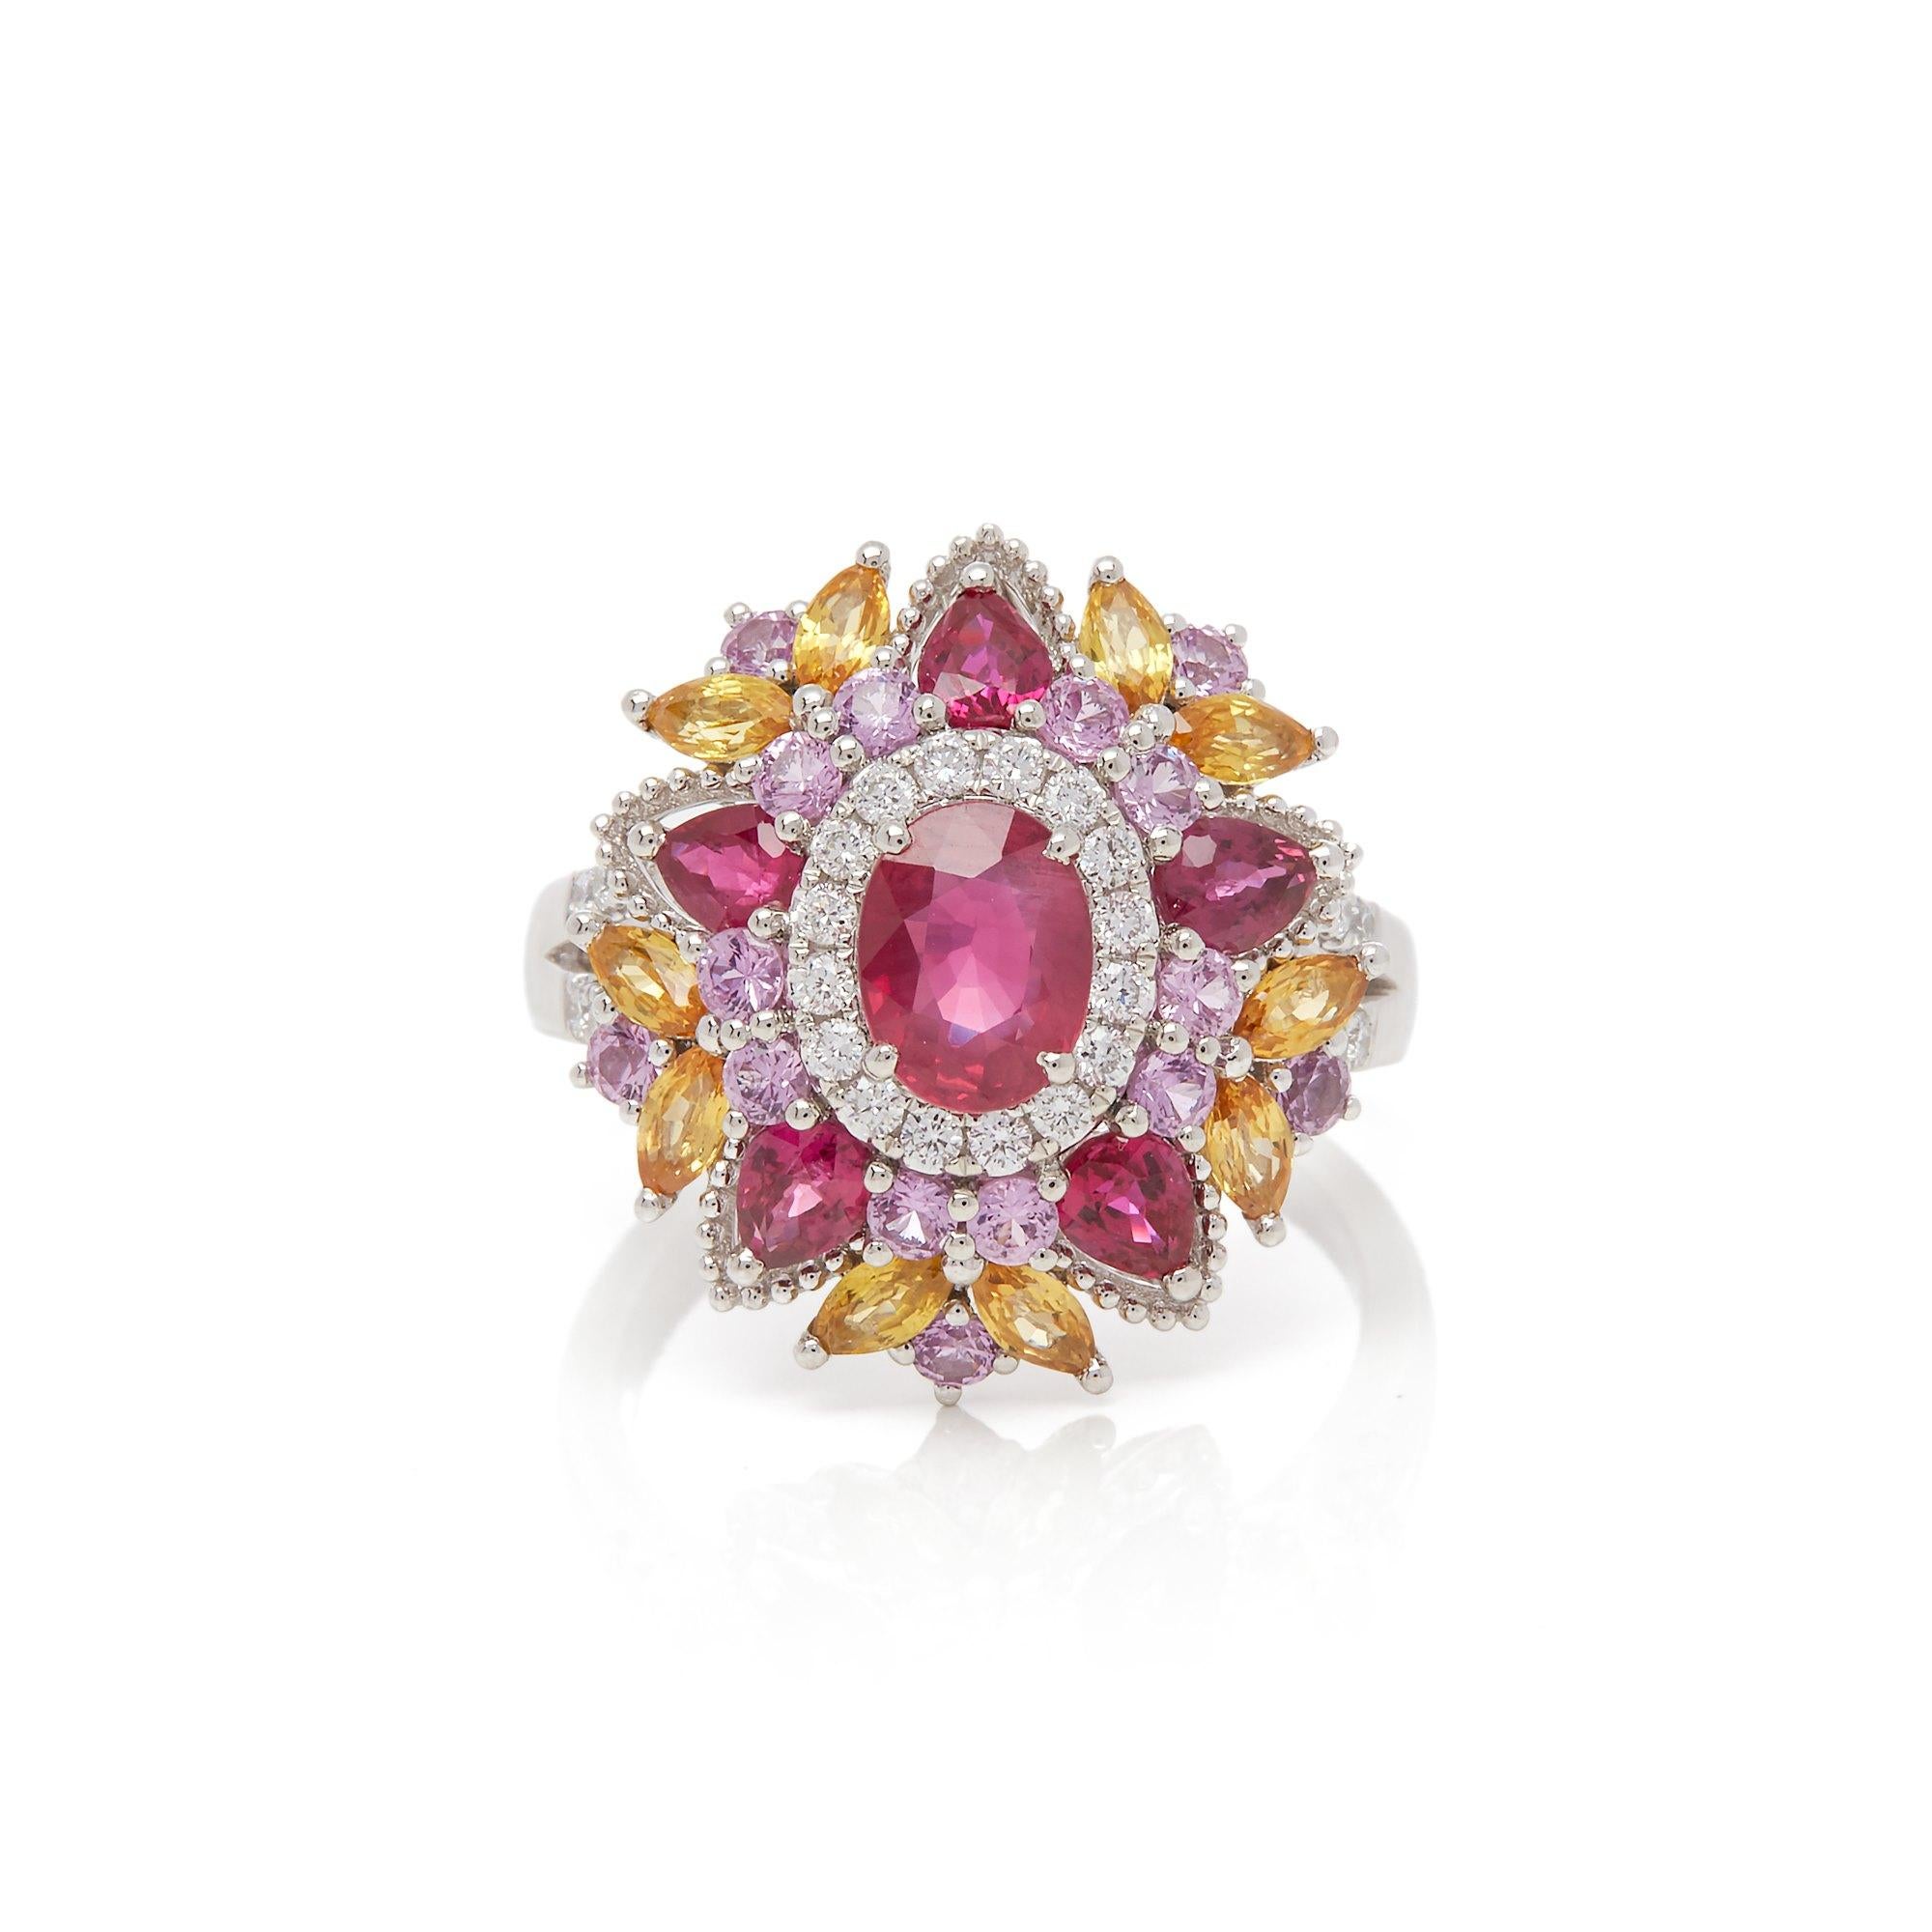 This ring designed by David Jerome is from his private collection and features one oval cut Ruby sourced in Mozambique totalling 1.17cts. Set with a mix of round brilliant cut Diamonds, Rubies, pink and yellow Sapphires totalling 2.72cts combined.